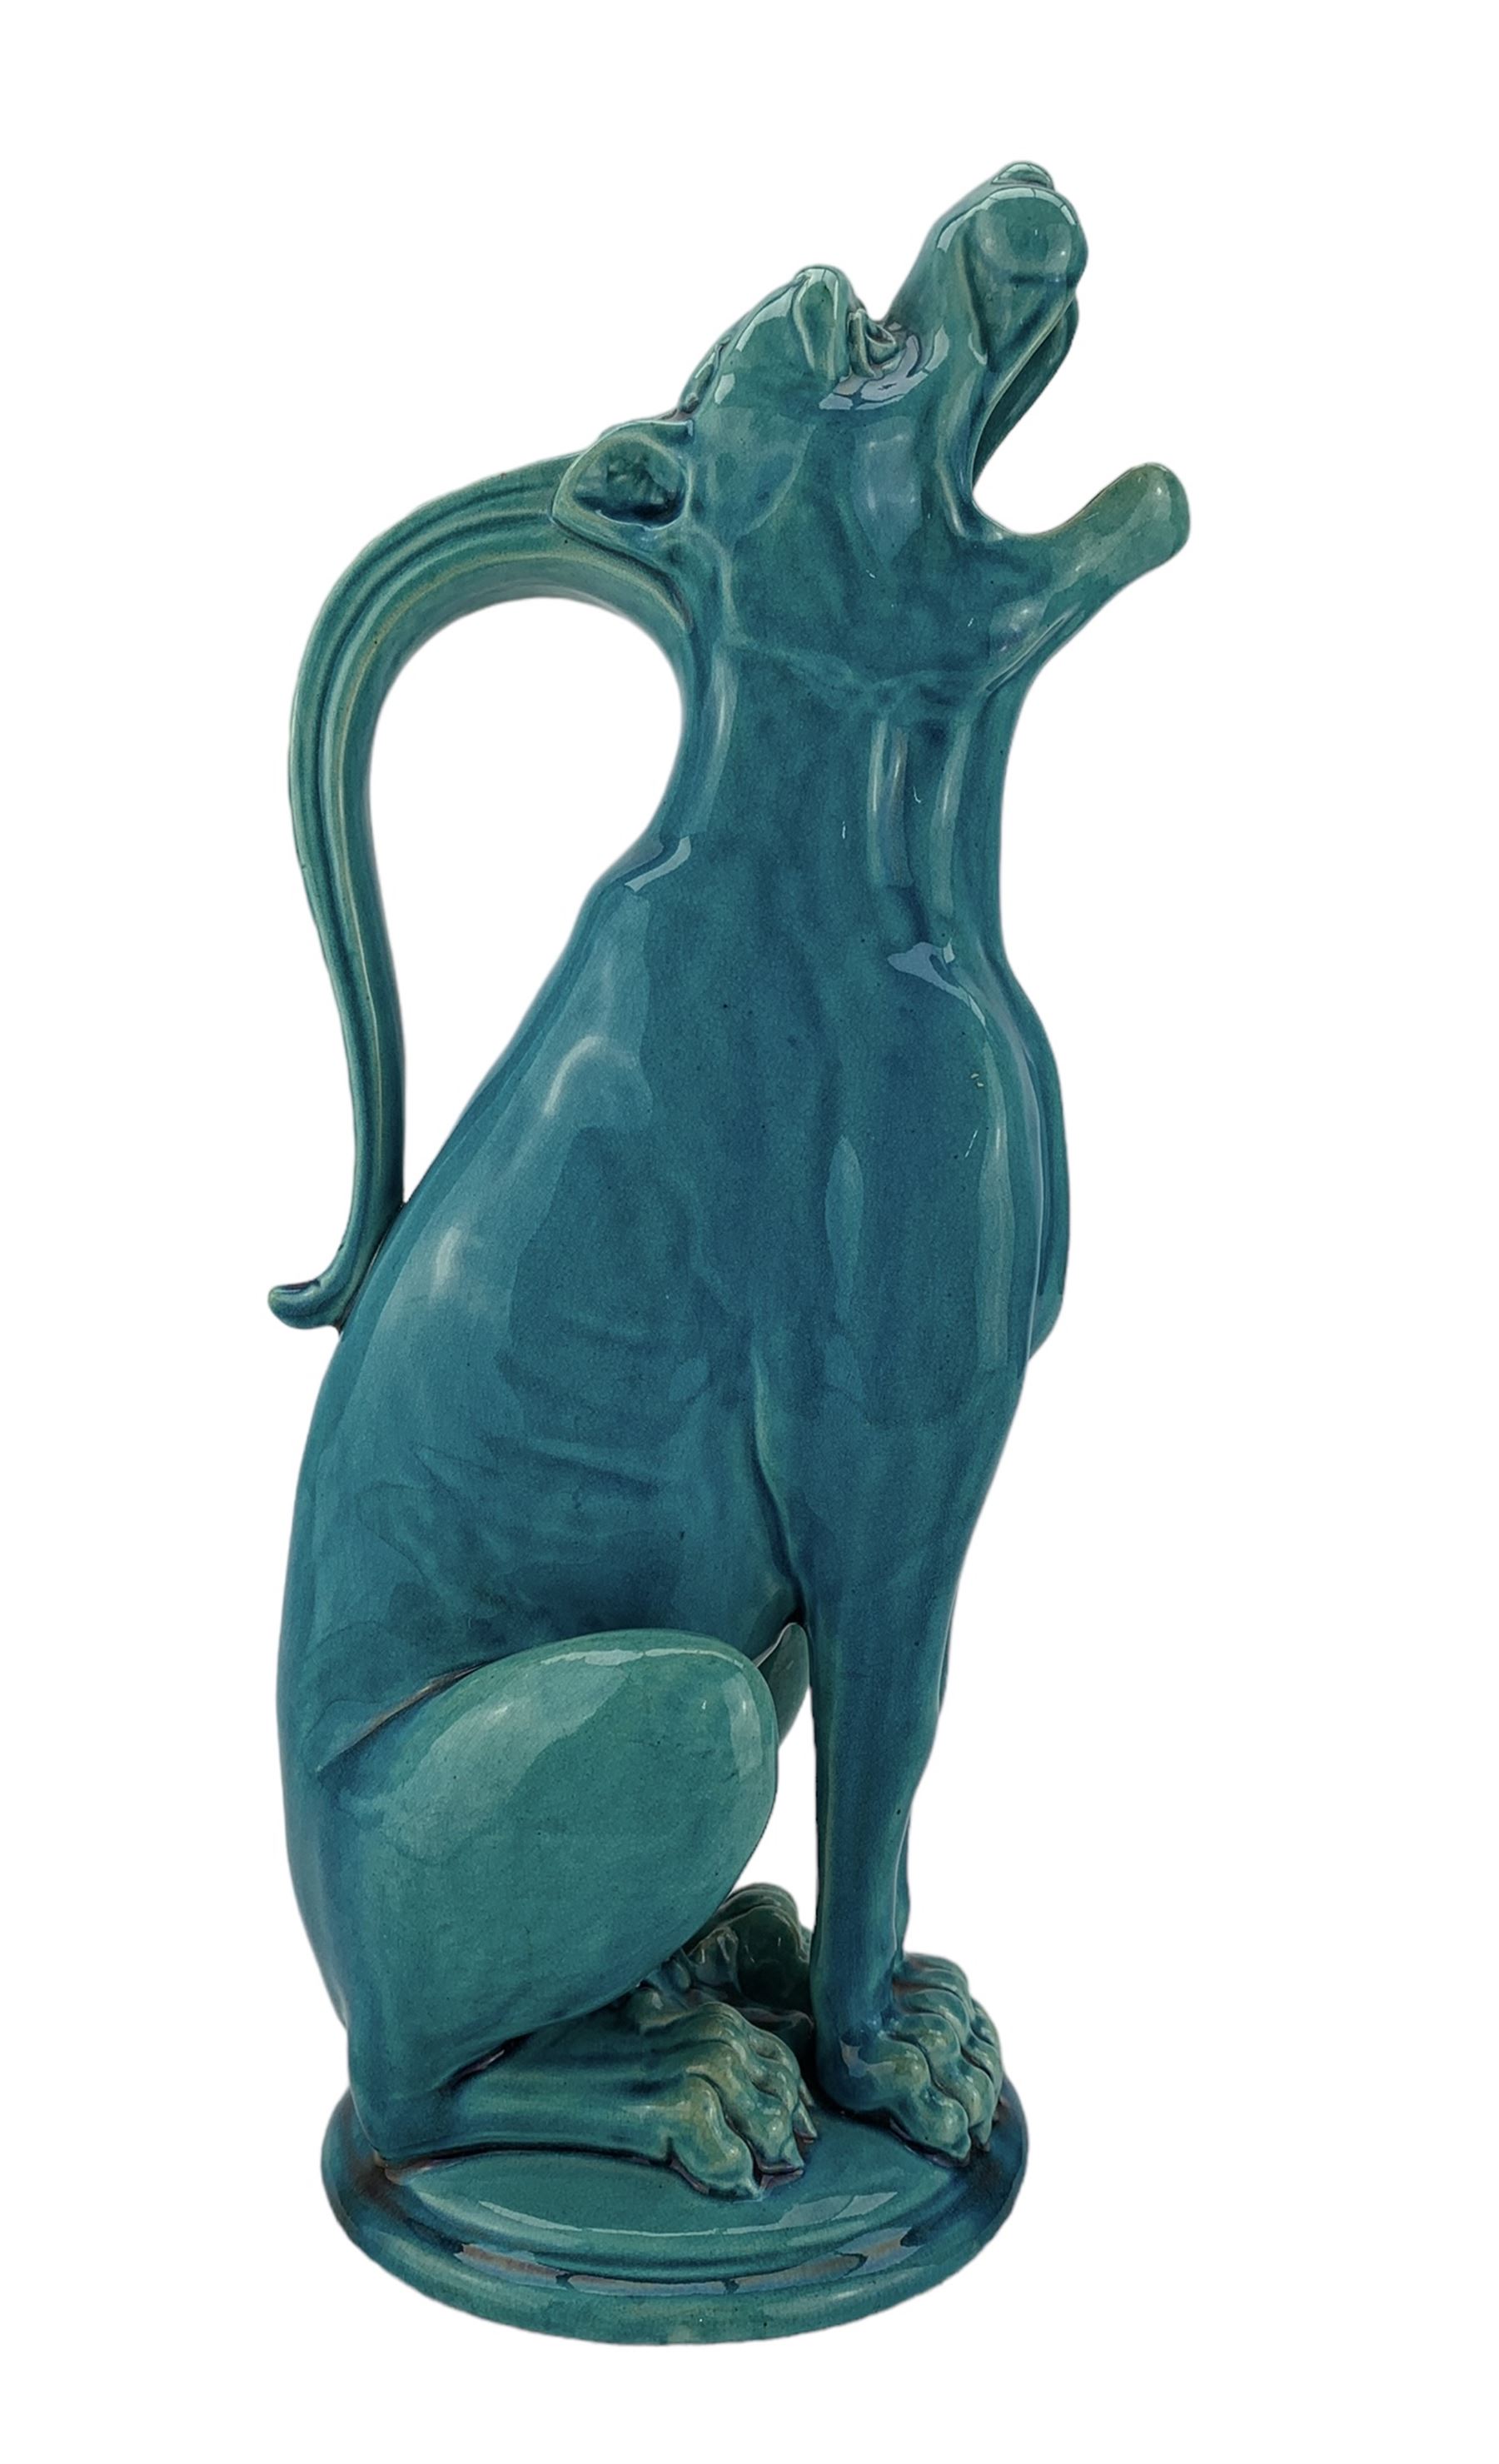 Burmantofts Faience turquoise-glaze ewer modelled as a grotesque hound - Image 3 of 6